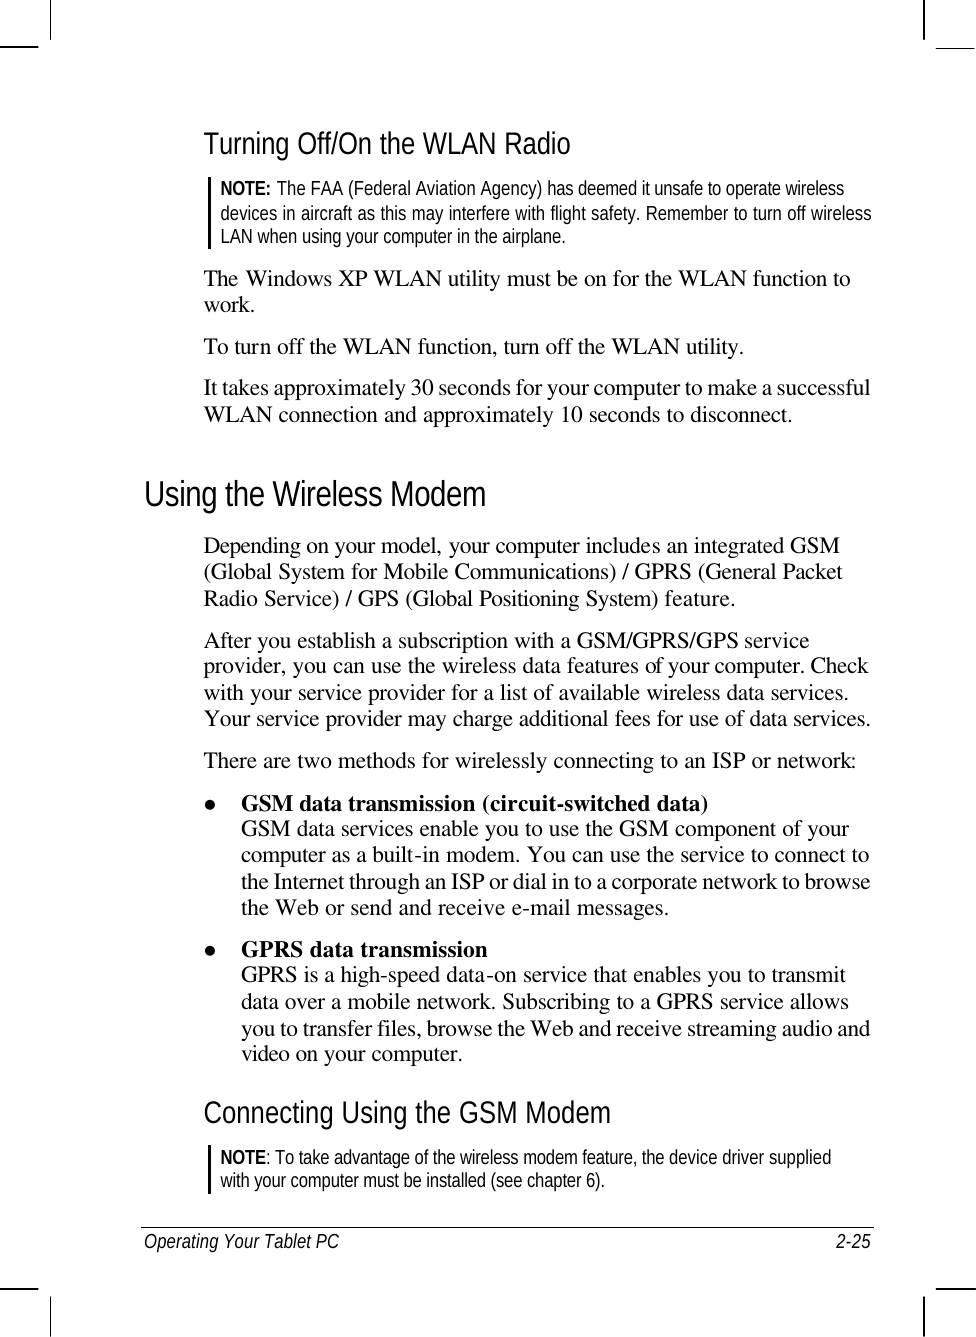  Operating Your Tablet PC 2-25 Turning Off/On the WLAN Radio NOTE: The FAA (Federal Aviation Agency) has deemed it unsafe to operate wireless devices in aircraft as this may interfere with flight safety. Remember to turn off wireless LAN when using your computer in the airplane.  The Windows XP WLAN utility must be on for the WLAN function to work. To turn off the WLAN function, turn off the WLAN utility. It takes approximately 30 seconds for your computer to make a successful WLAN connection and approximately 10 seconds to disconnect. Using the Wireless Modem Depending on your model, your computer includes an integrated GSM (Global System for Mobile Communications) / GPRS (General Packet Radio Service) / GPS (Global Positioning System) feature. After you establish a subscription with a GSM/GPRS/GPS service provider, you can use the wireless data features of your computer. Check with your service provider for a list of available wireless data services. Your service provider may charge additional fees for use of data services. There are two methods for wirelessly connecting to an ISP or network: l GSM data transmission (circuit-switched data) GSM data services enable you to use the GSM component of your computer as a built-in modem. You can use the service to connect to the Internet through an ISP or dial in to a corporate network to browse the Web or send and receive e-mail messages. l GPRS data transmission GPRS is a high-speed data-on service that enables you to transmit data over a mobile network. Subscribing to a GPRS service allows you to transfer files, browse the Web and receive streaming audio and video on your computer. Connecting Using the GSM Modem NOTE: To take advantage of the wireless modem feature, the device driver supplied with your computer must be installed (see chapter 6). 